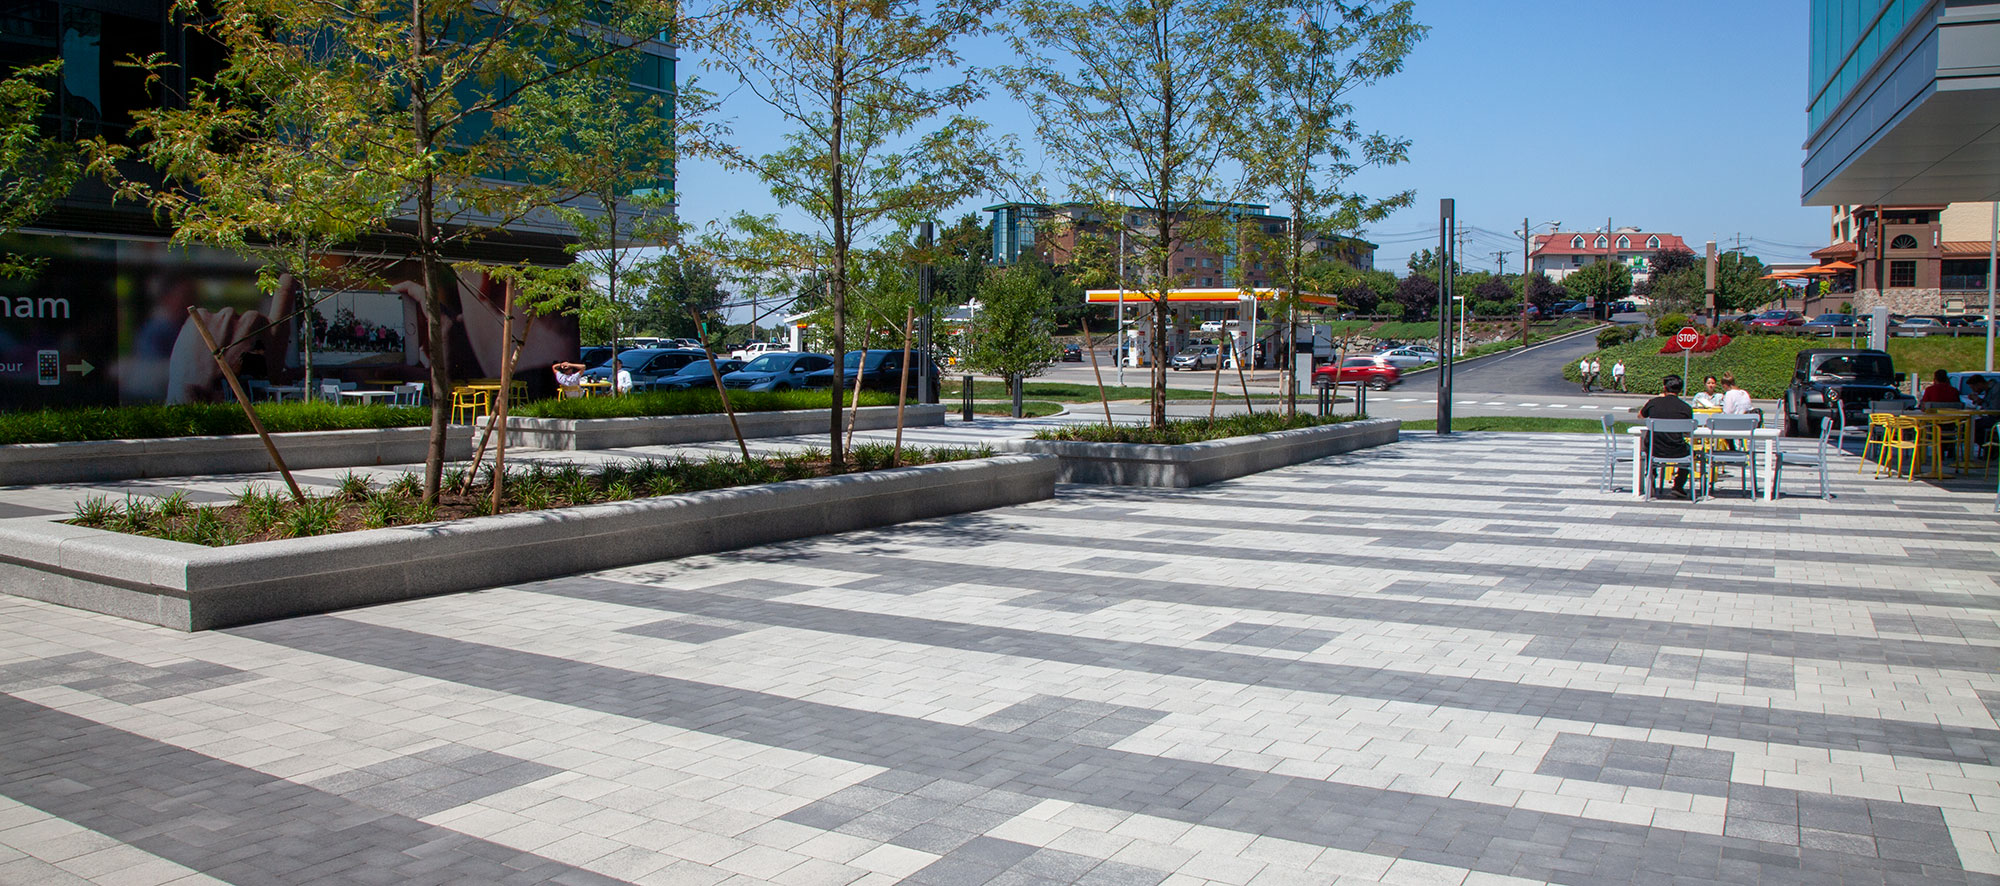 A plaza made from Unilock Umbriano pavers in a geometric pattern is lined by trees, gardens and seating areas.